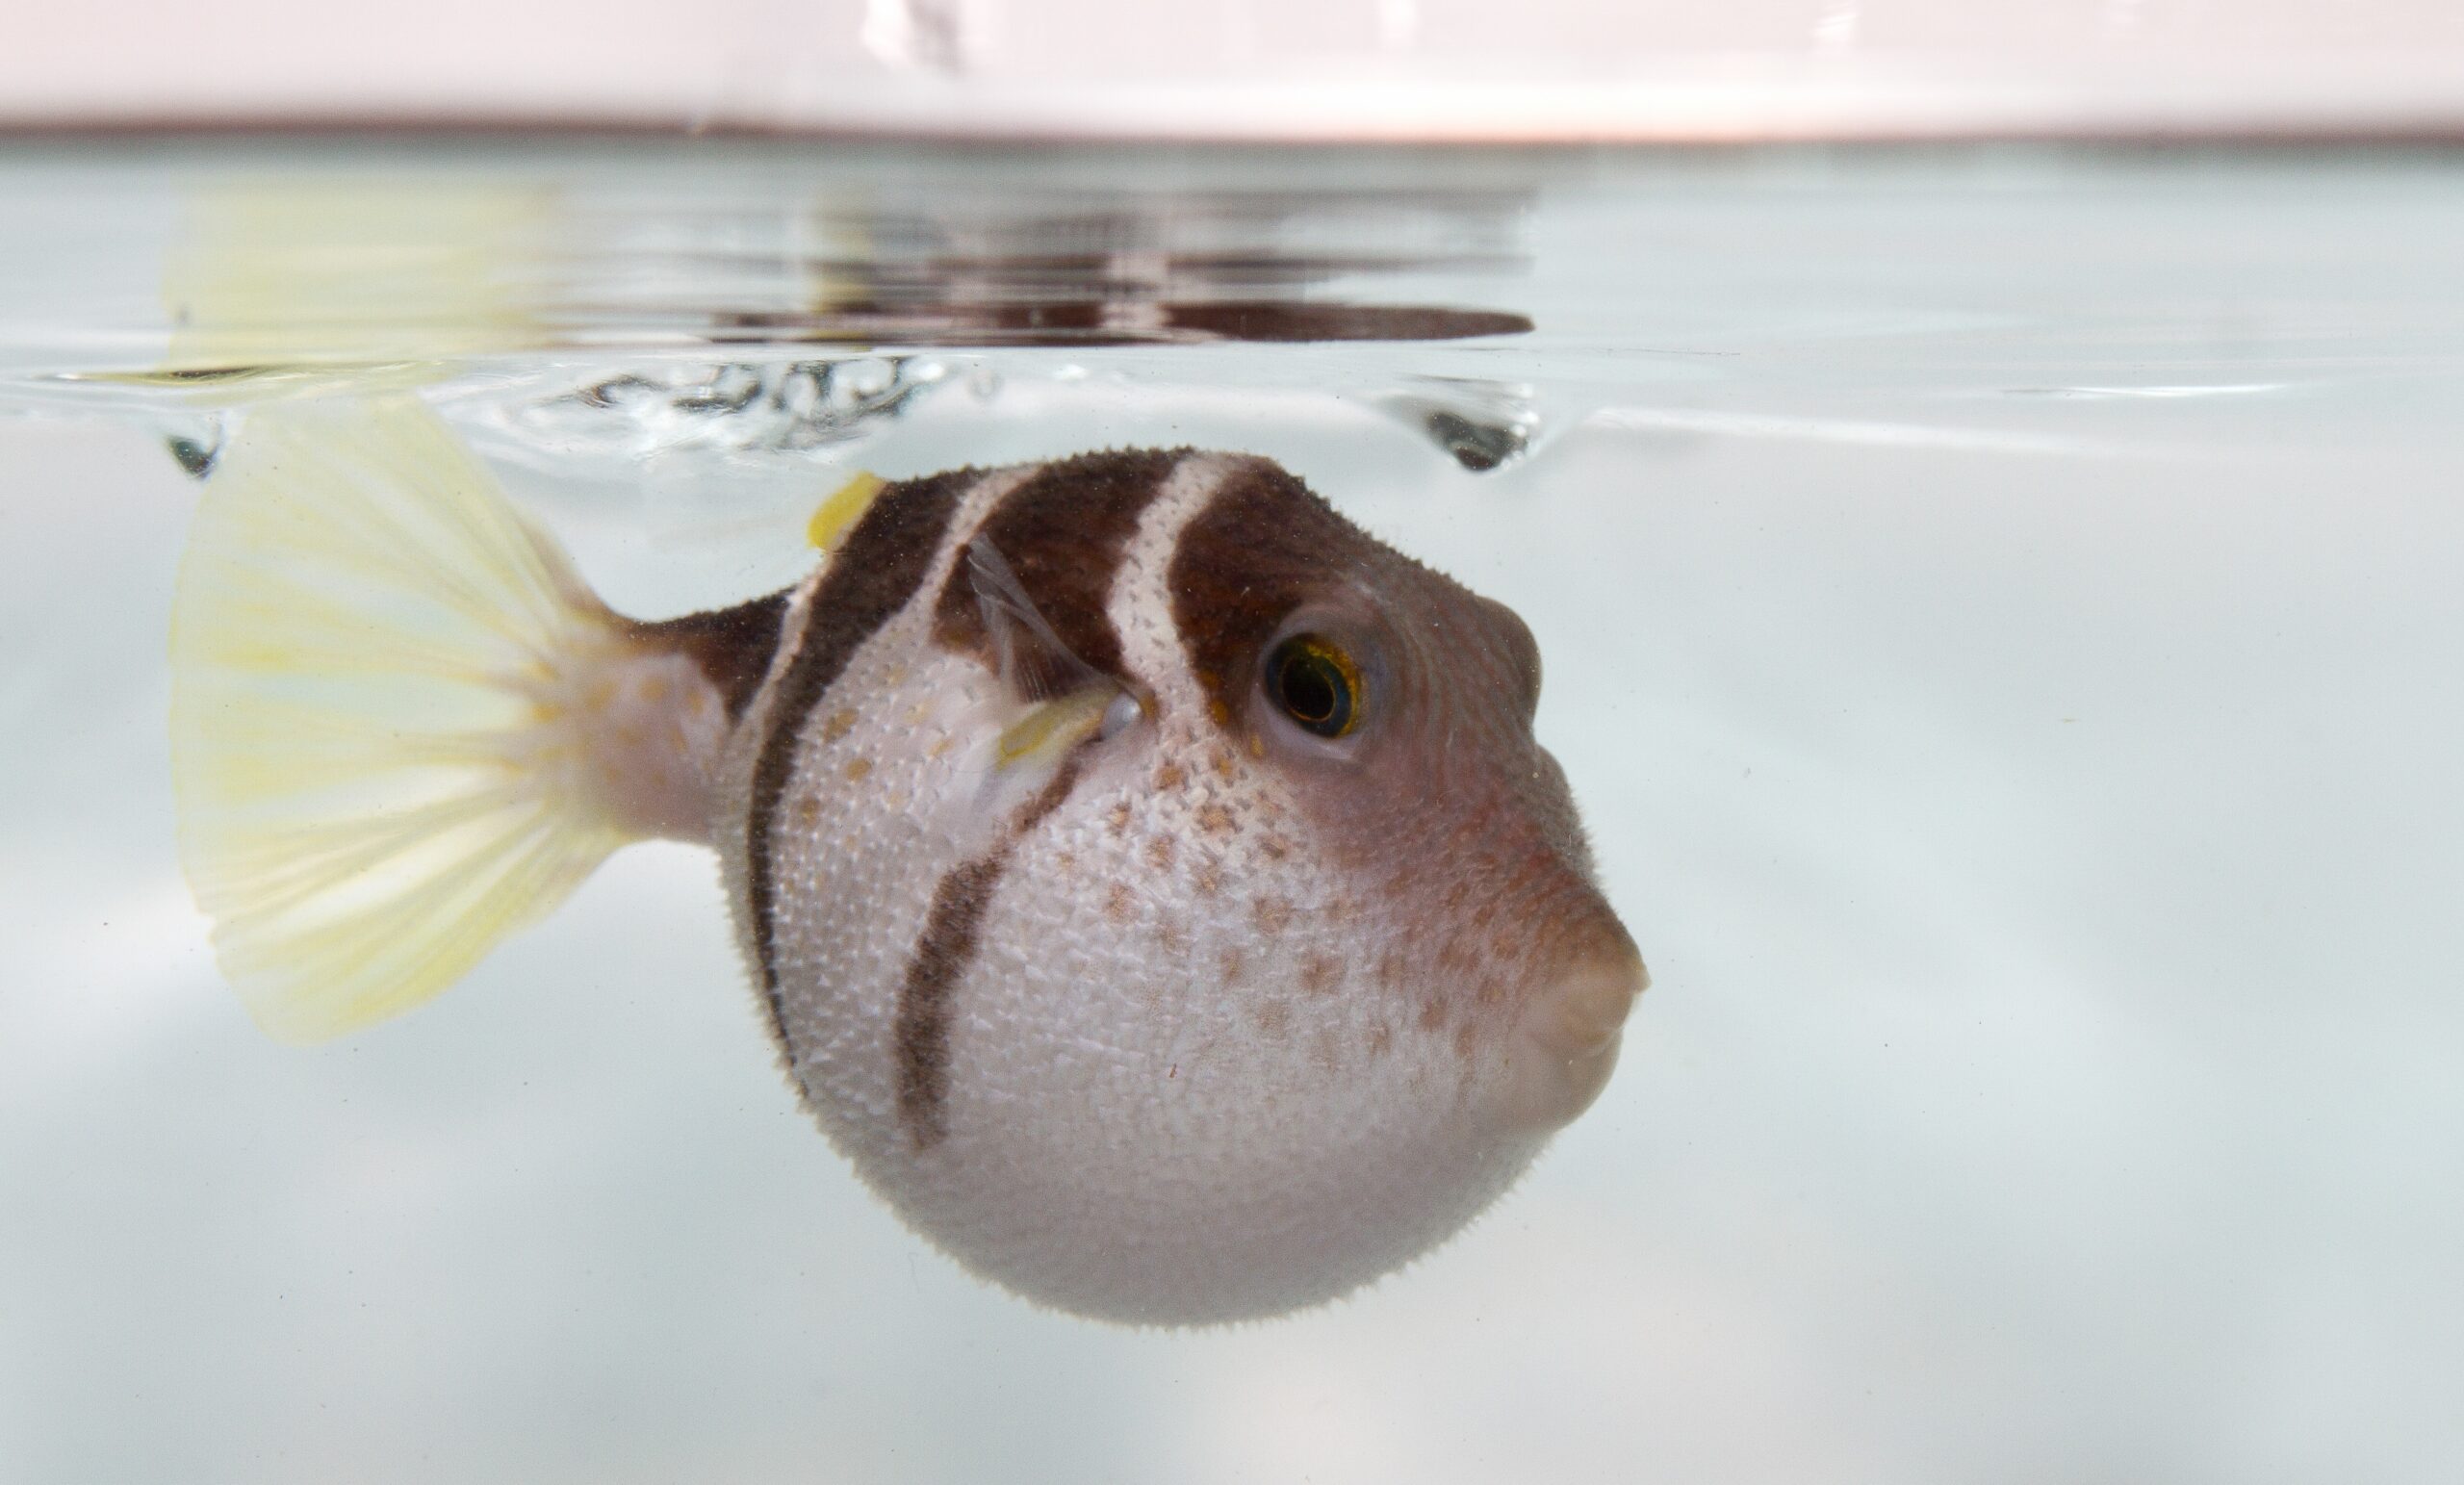 Pufferfish Don’t Hold Their Breaths To Stay Puffed, Scientists Find